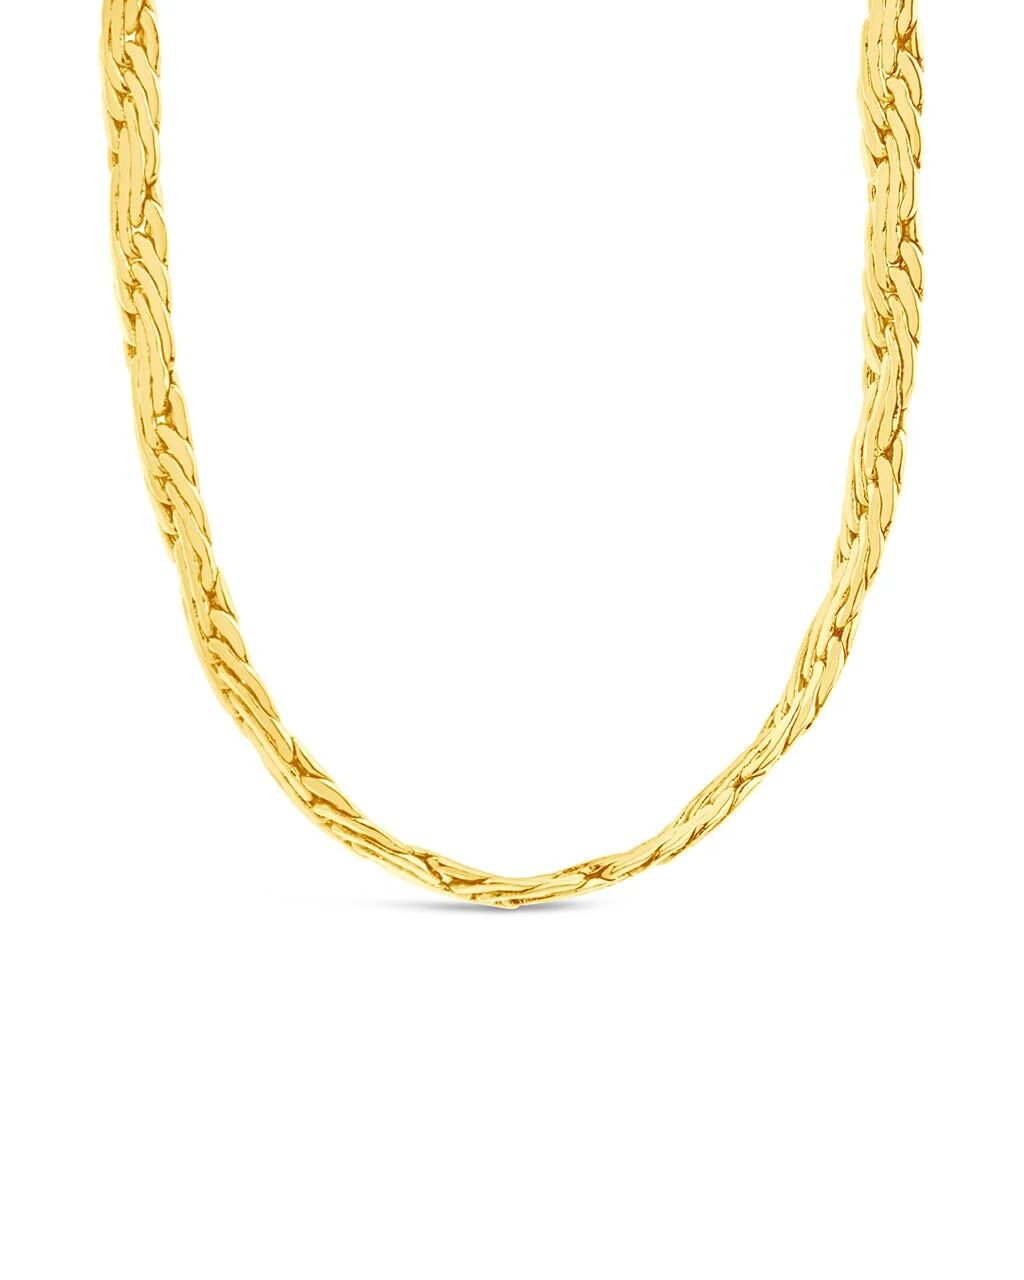 Men's Jewelry | Flat Wheat Chain Link Necklace | Sterling Forever